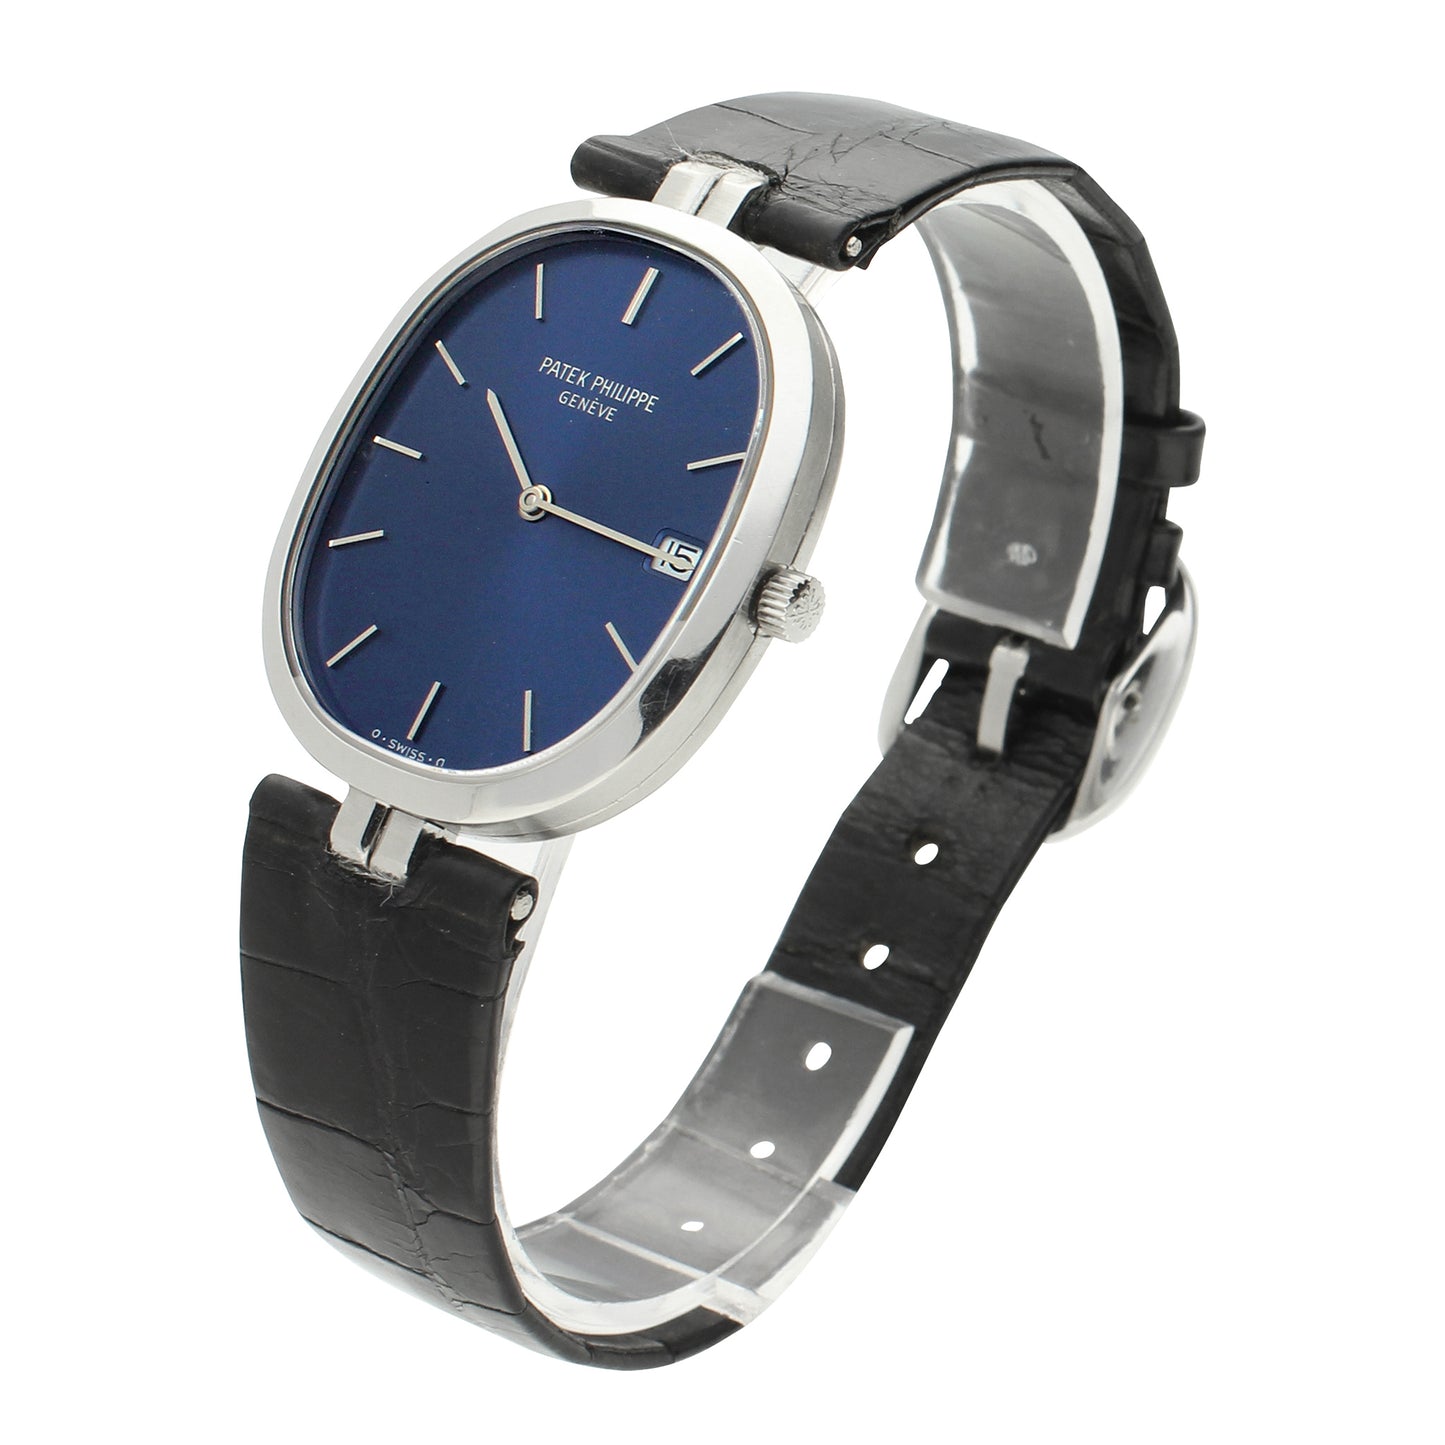 Stainless steel Patek Philippe, reference 3930 Ellipse Quartz wristwatch with blue dial. Made 1985